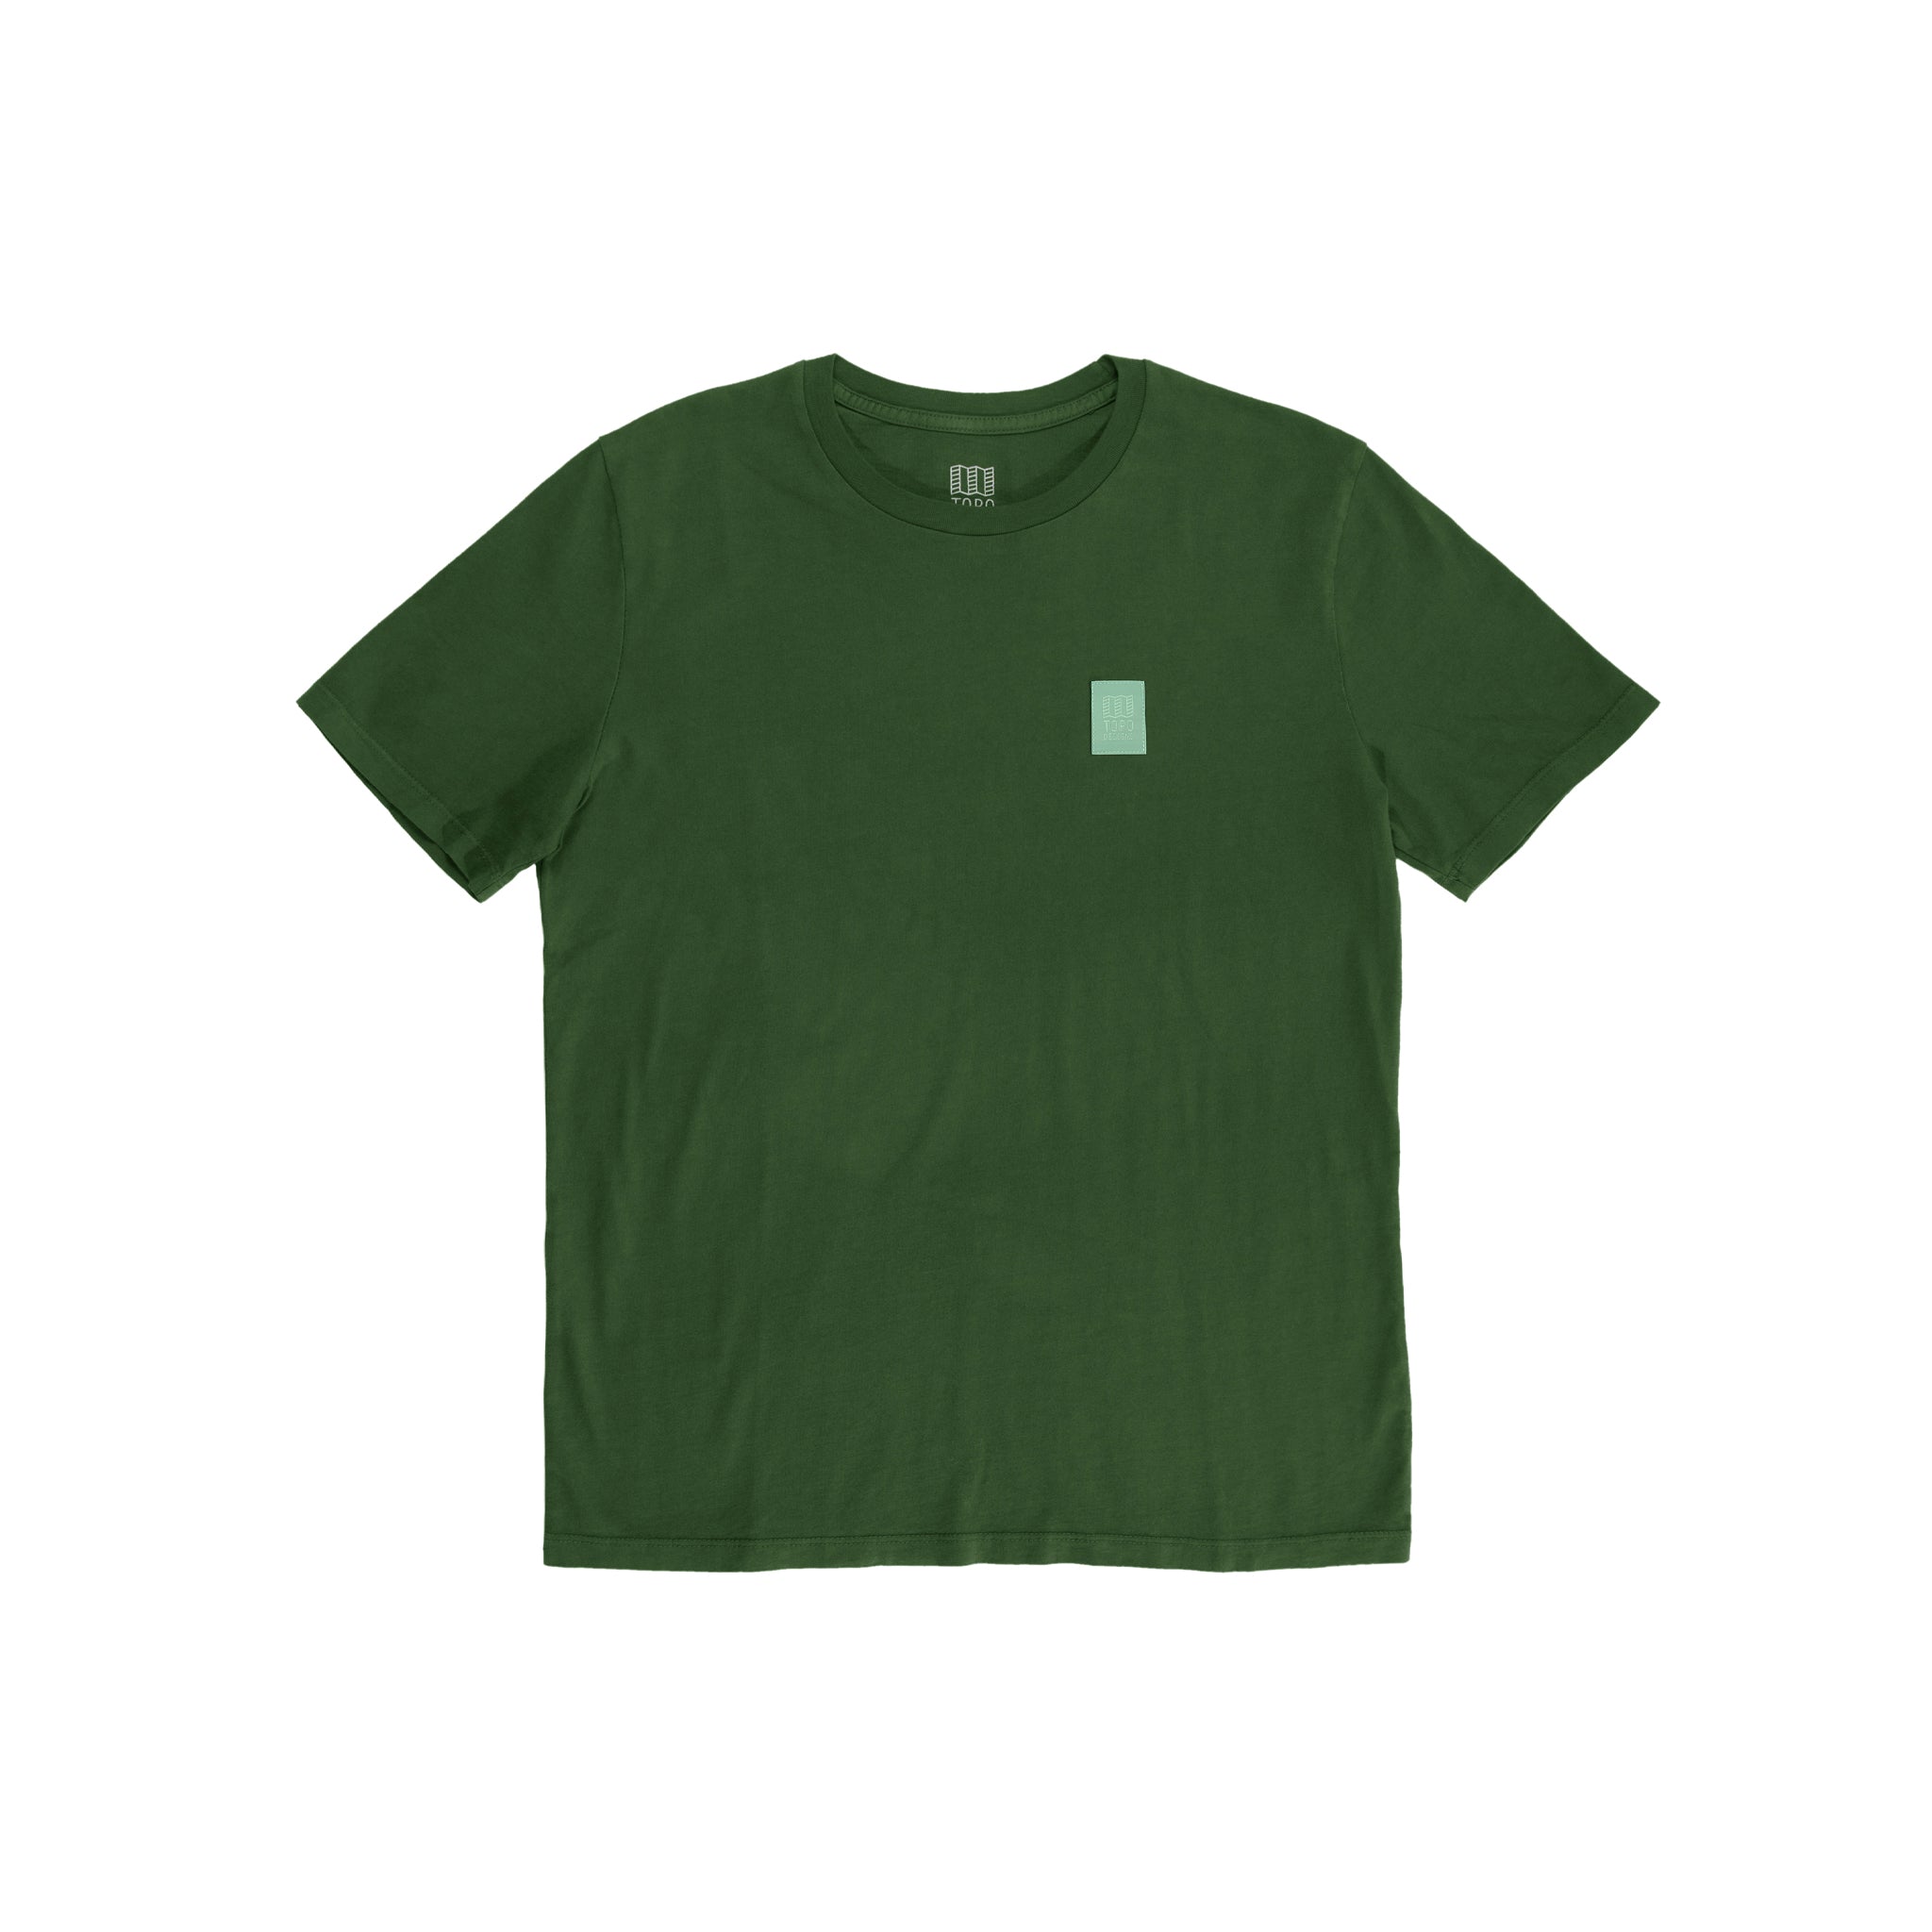 Front product shot of Topo Designs Men's Label short sleeve t-shirt in "Forest".